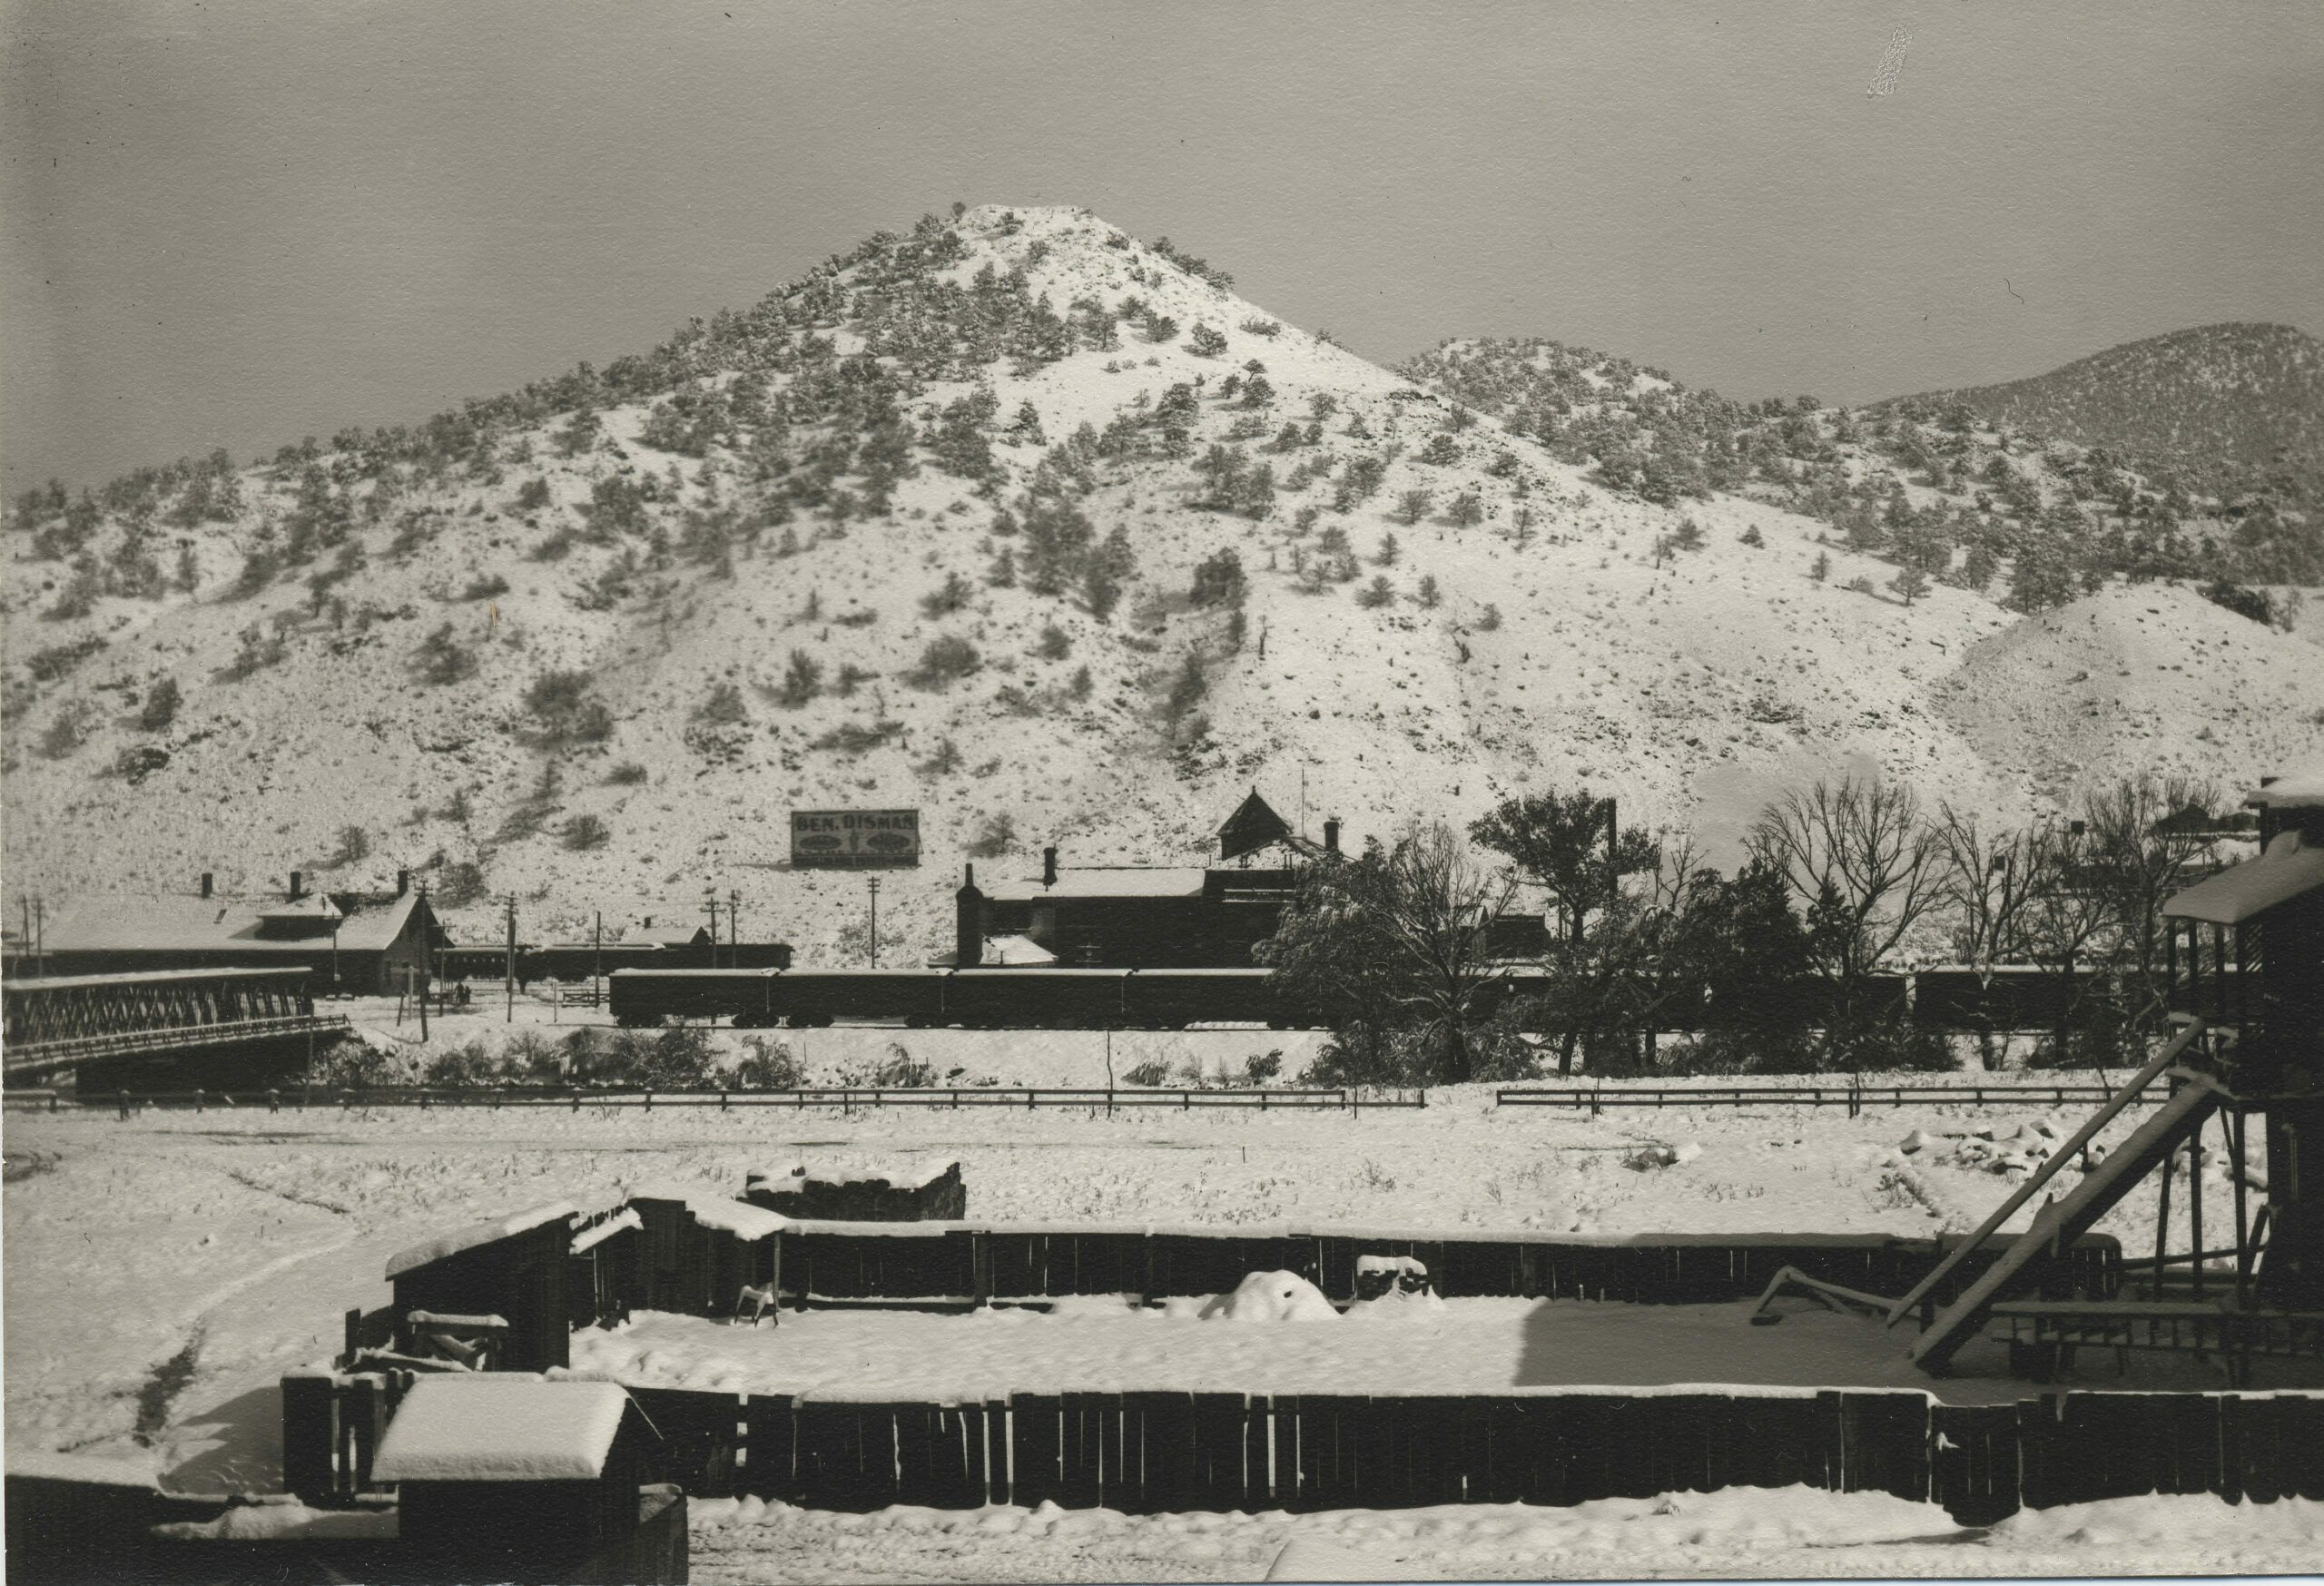 The depot and railyard, viewed from across the Arkansas River, near where Riverside Park is located today.